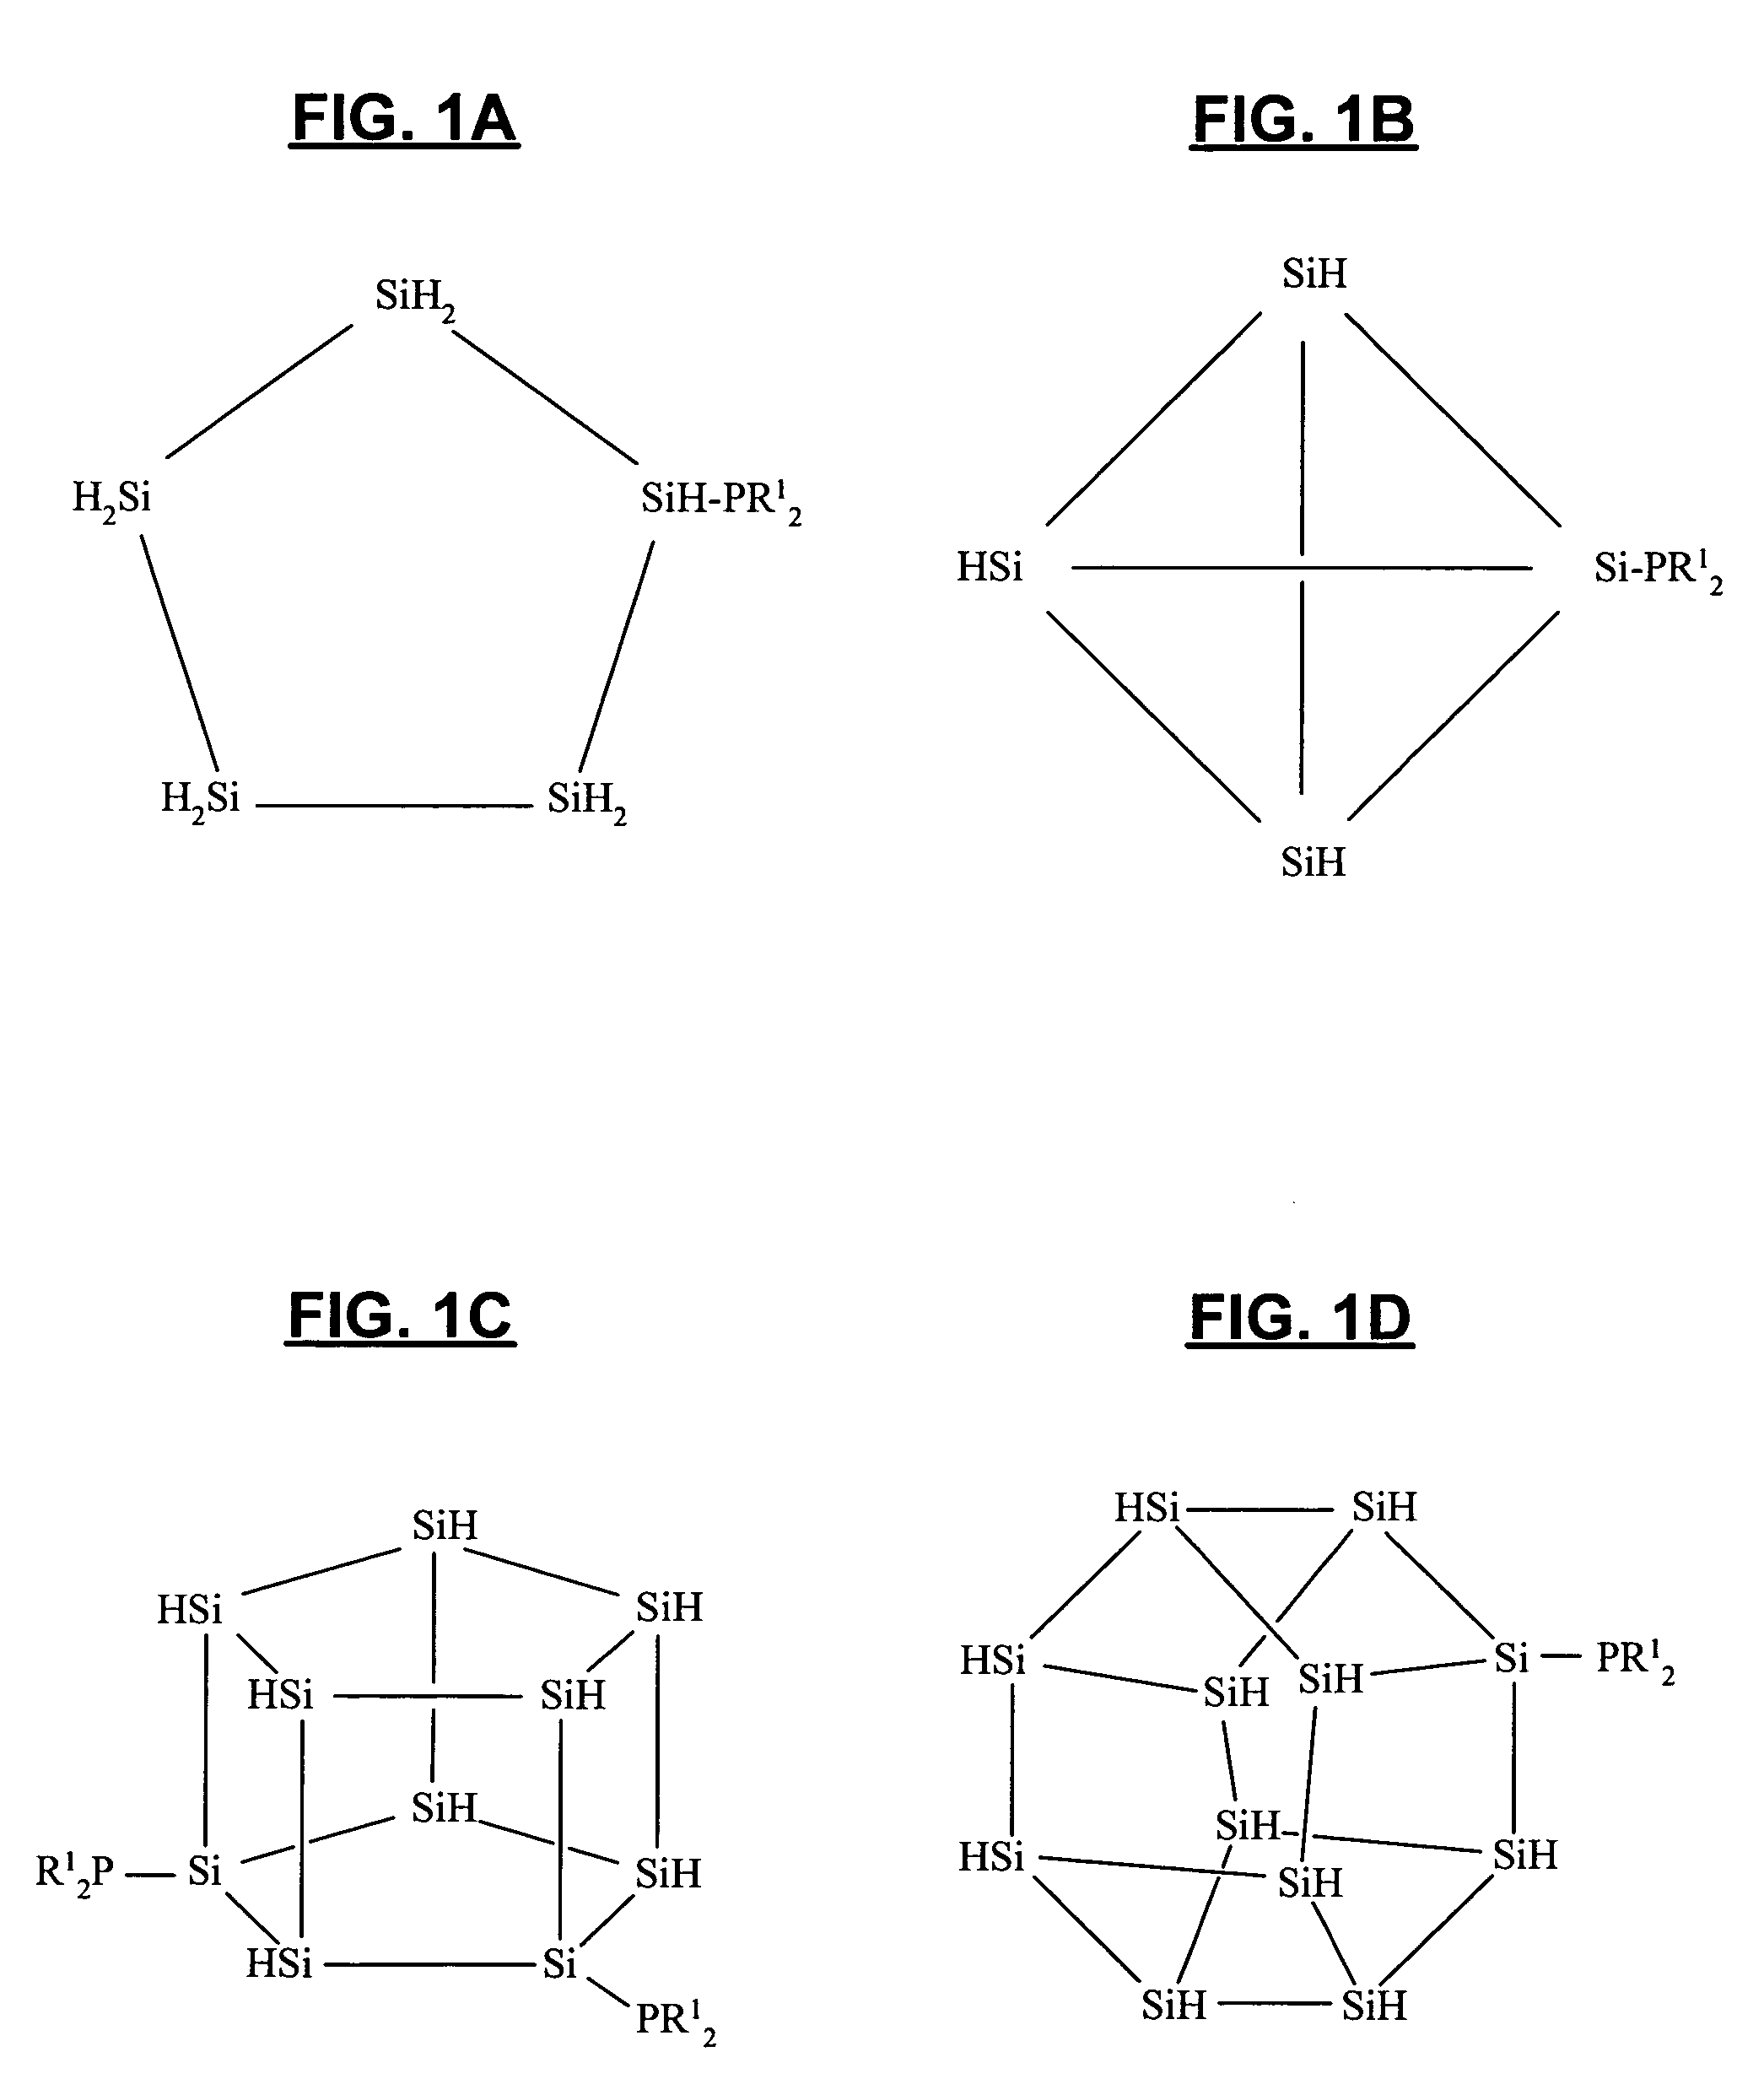 Dopant group-substituted semiconductor precursor compounds, compositions containing the same, and methods of making such compounds and compositions